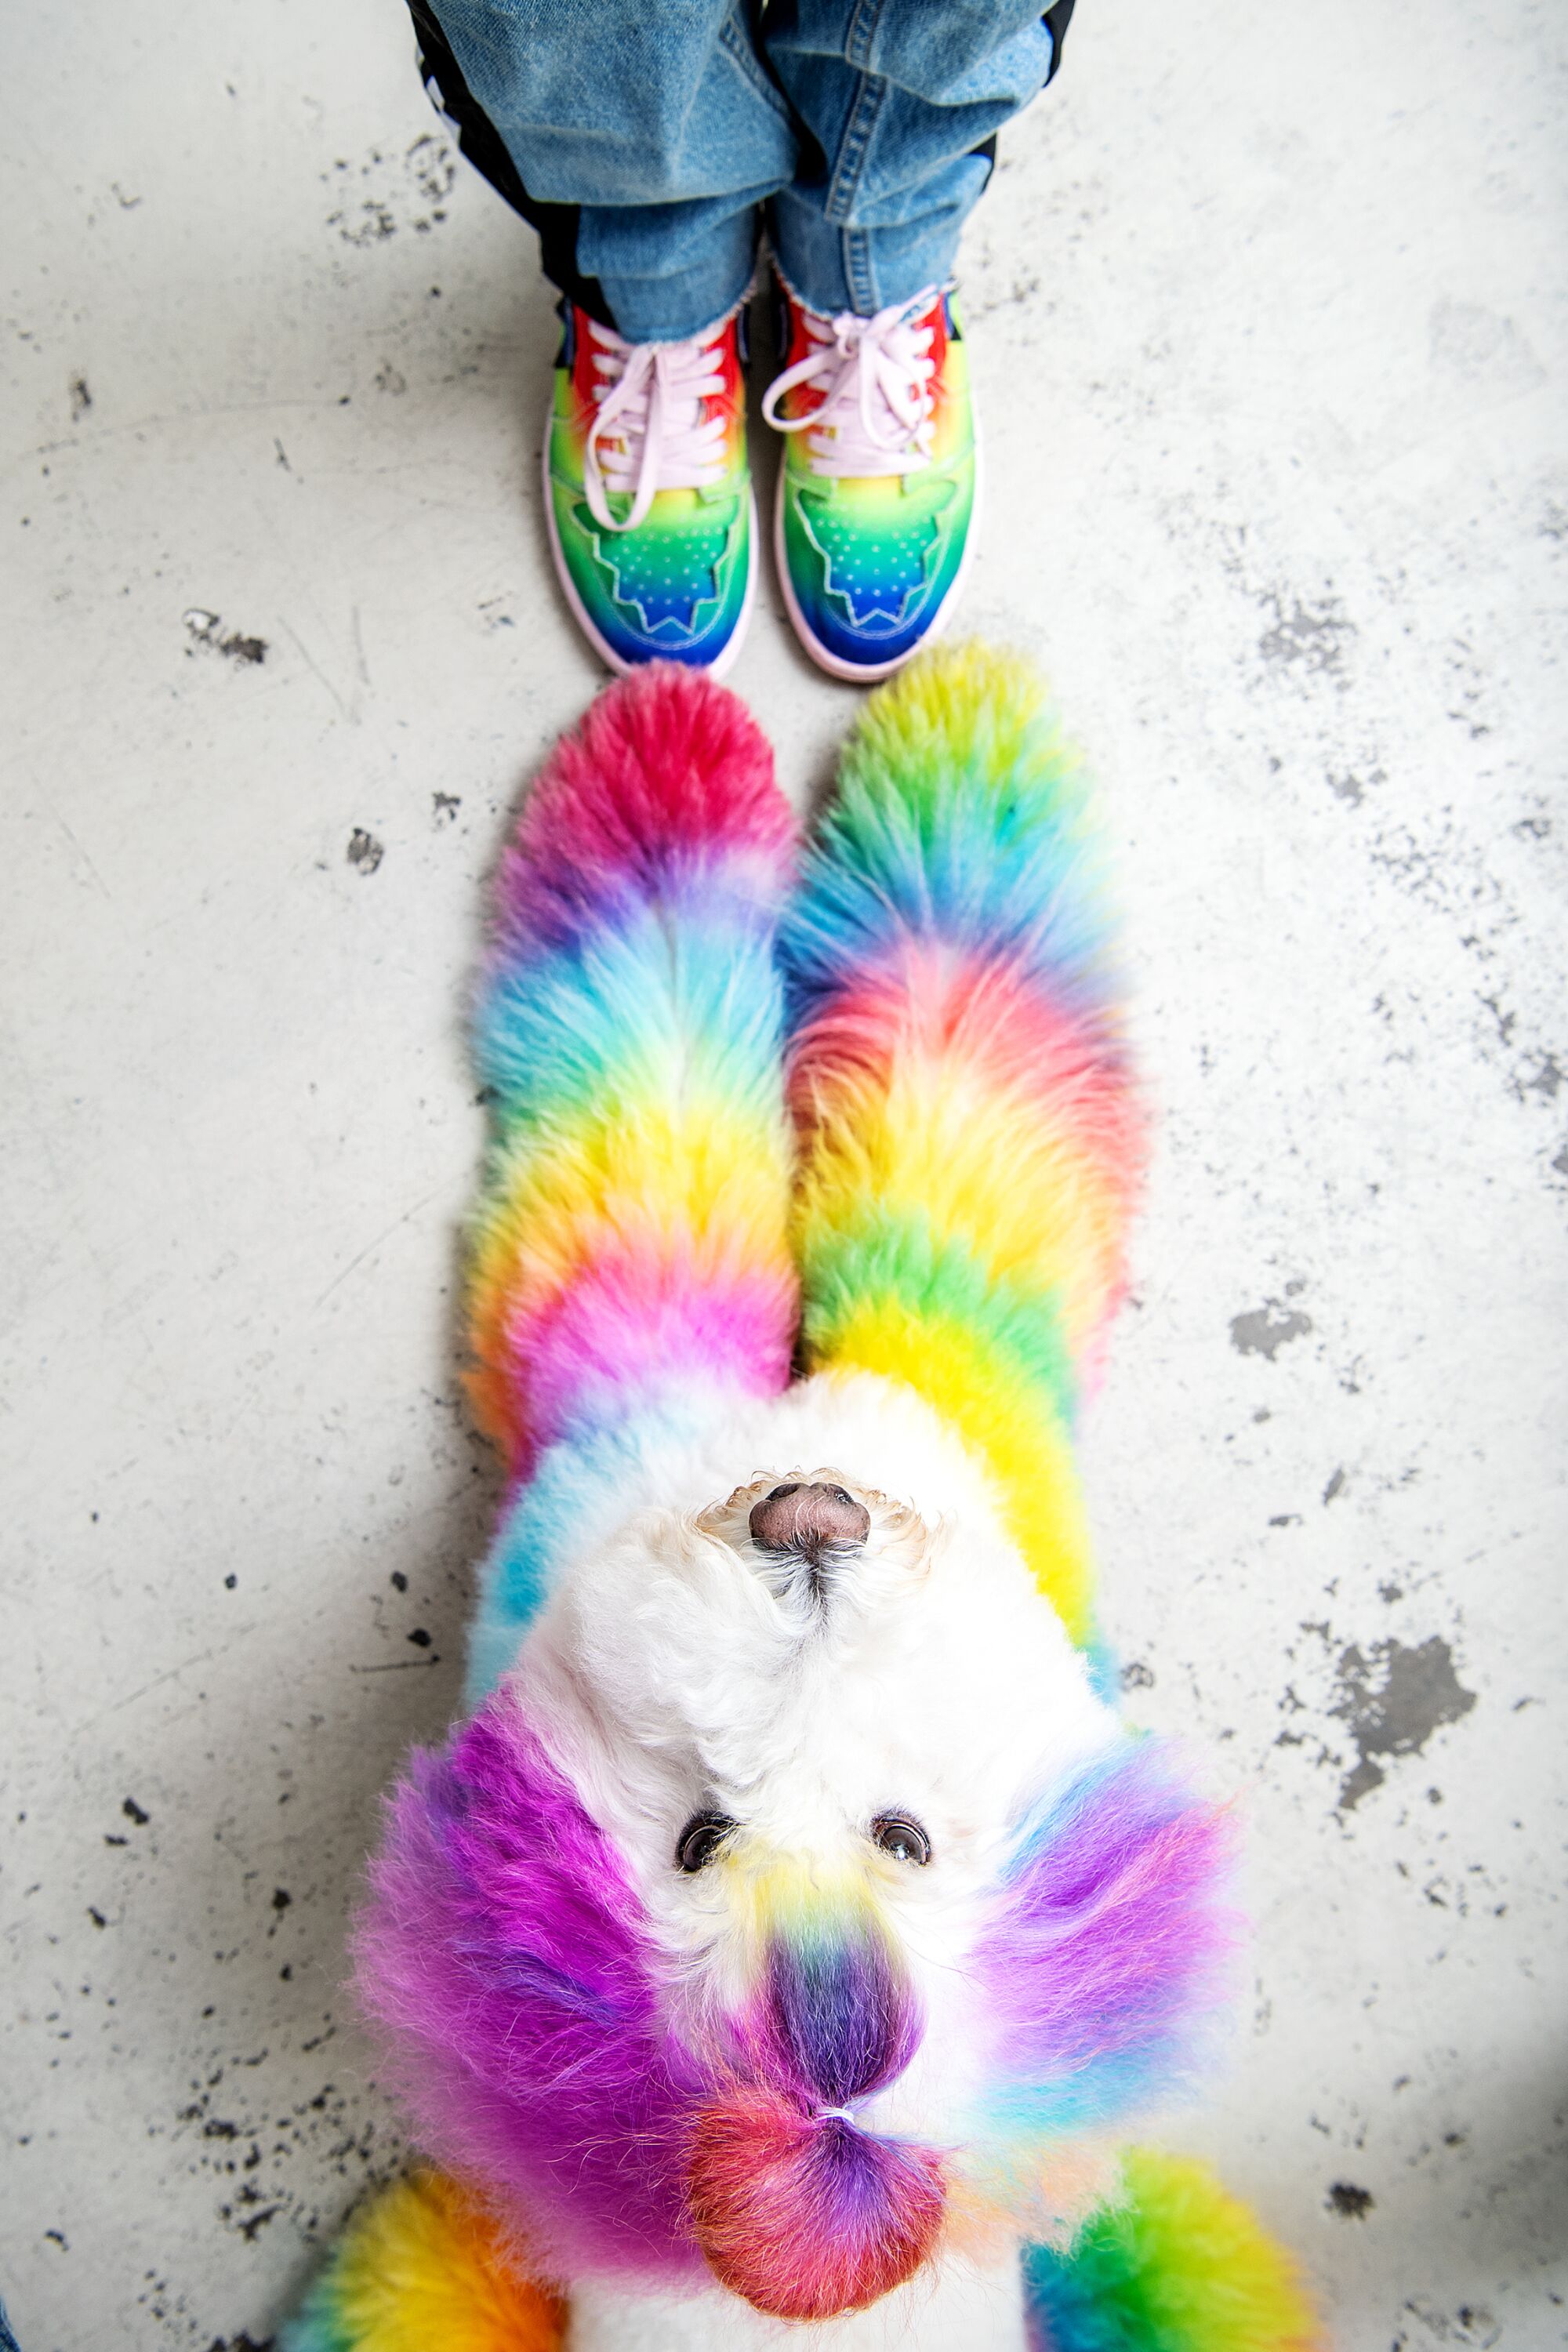 A rainbow dog stretches out its paws to a pair of rainbow shoes